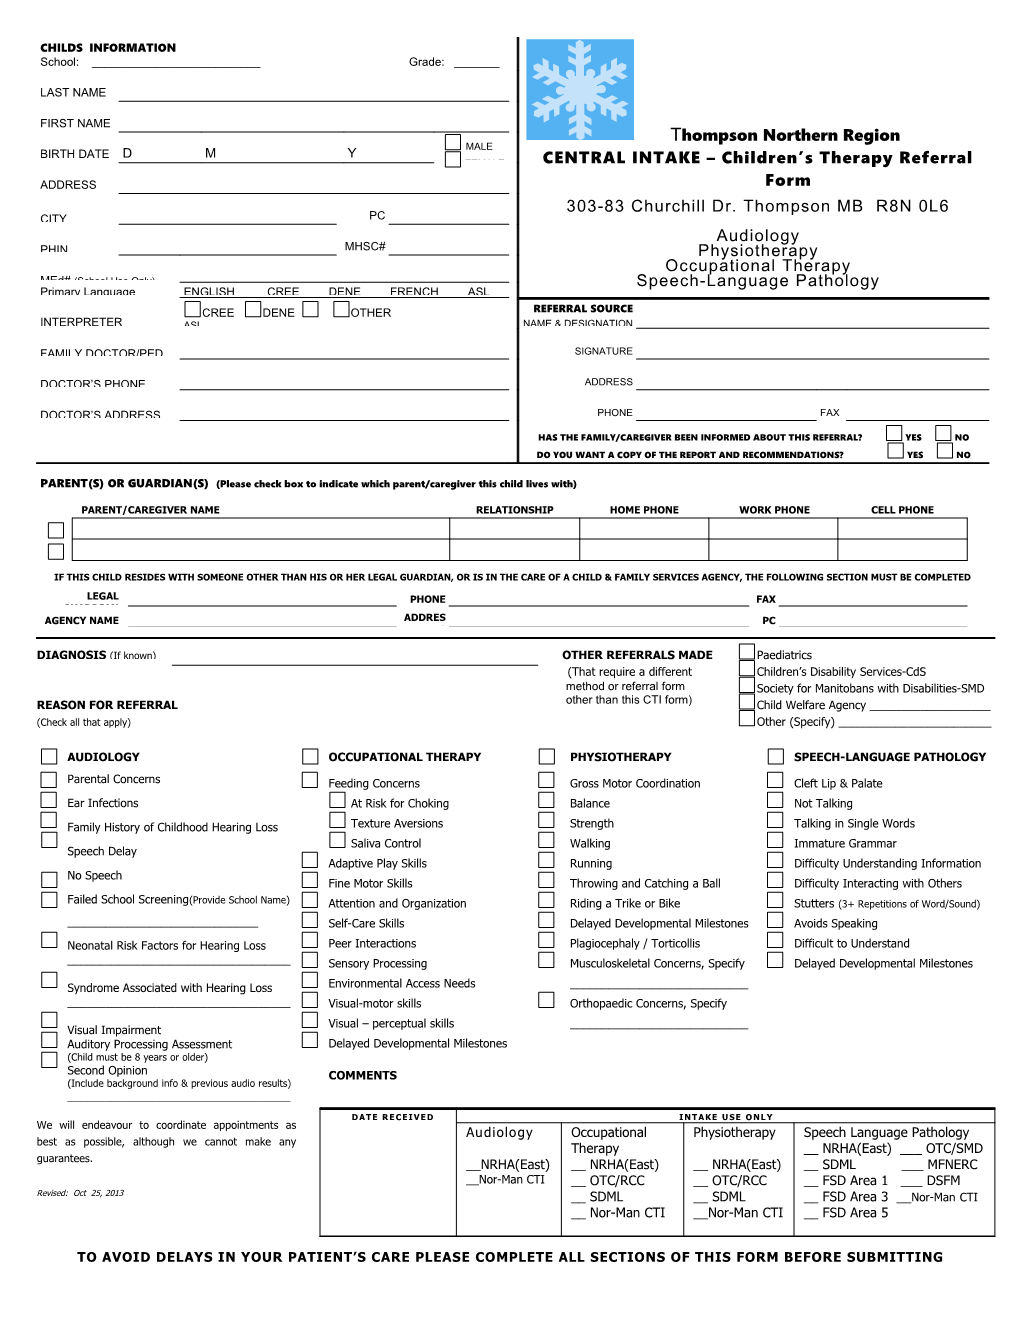 CENTRAL INTAKE Children S Therapy Referral Form